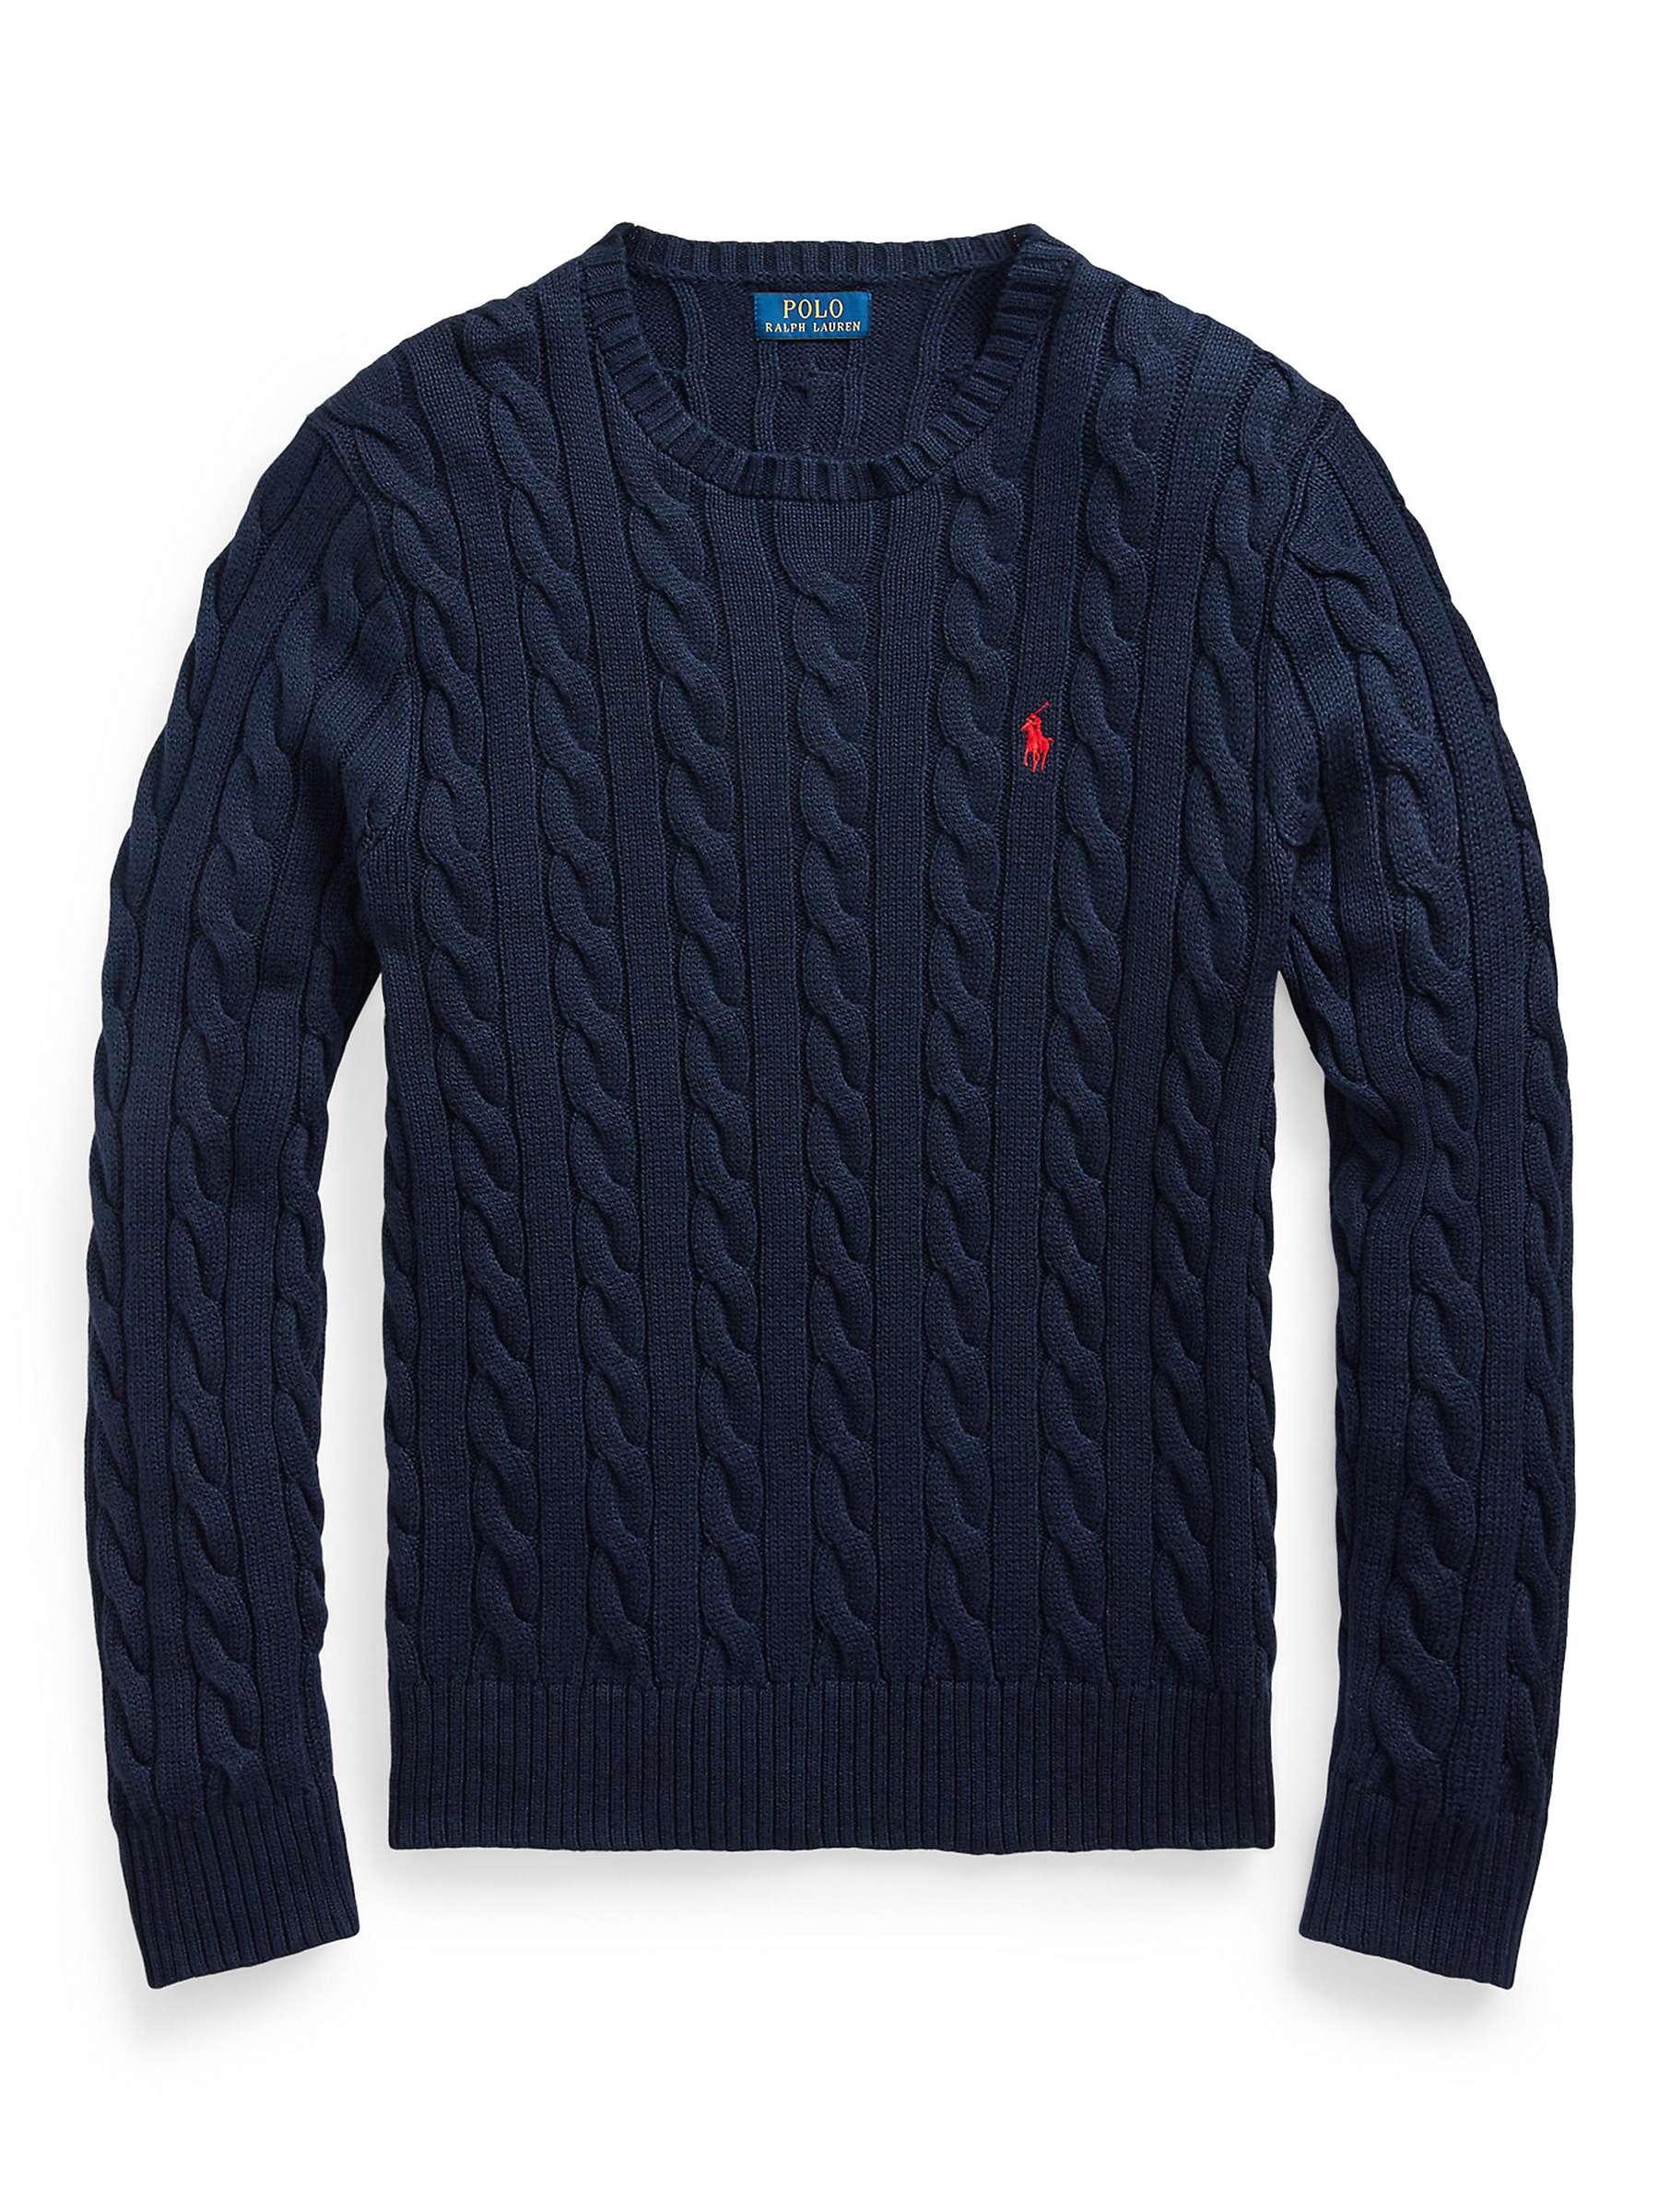 Buy Polo Ralph Lauren  Big & Tall Cable Knit Cotton Jumper Online at johnlewis.com